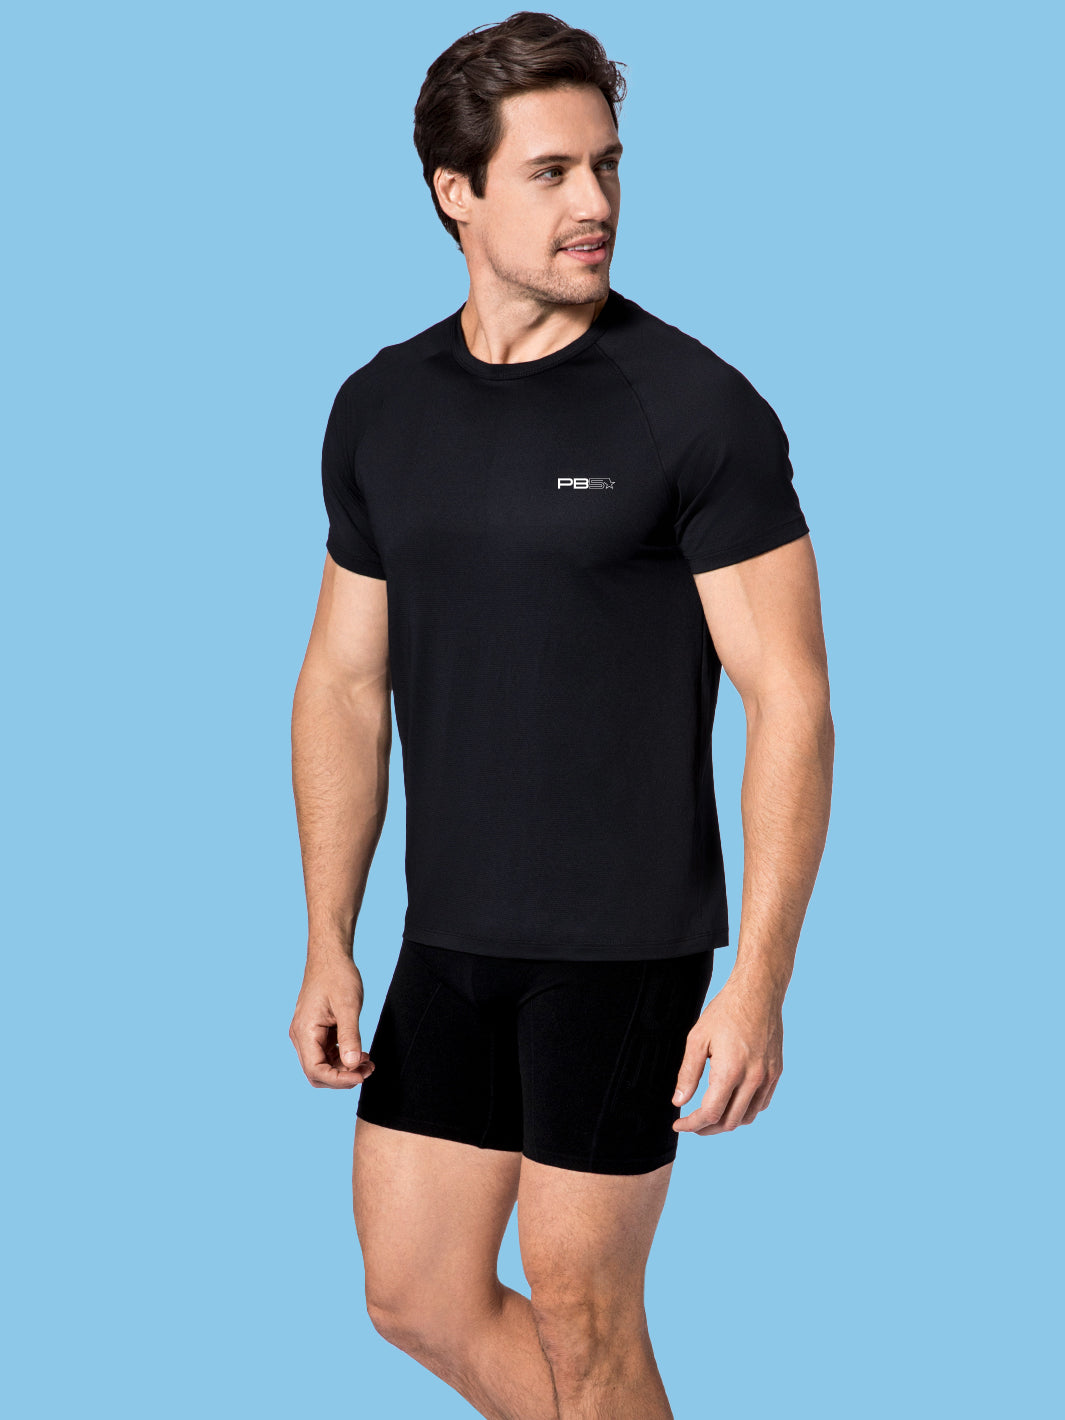 Man in black PB5star Core Performance Tee and compression shorts, designed for style and pickleball play.